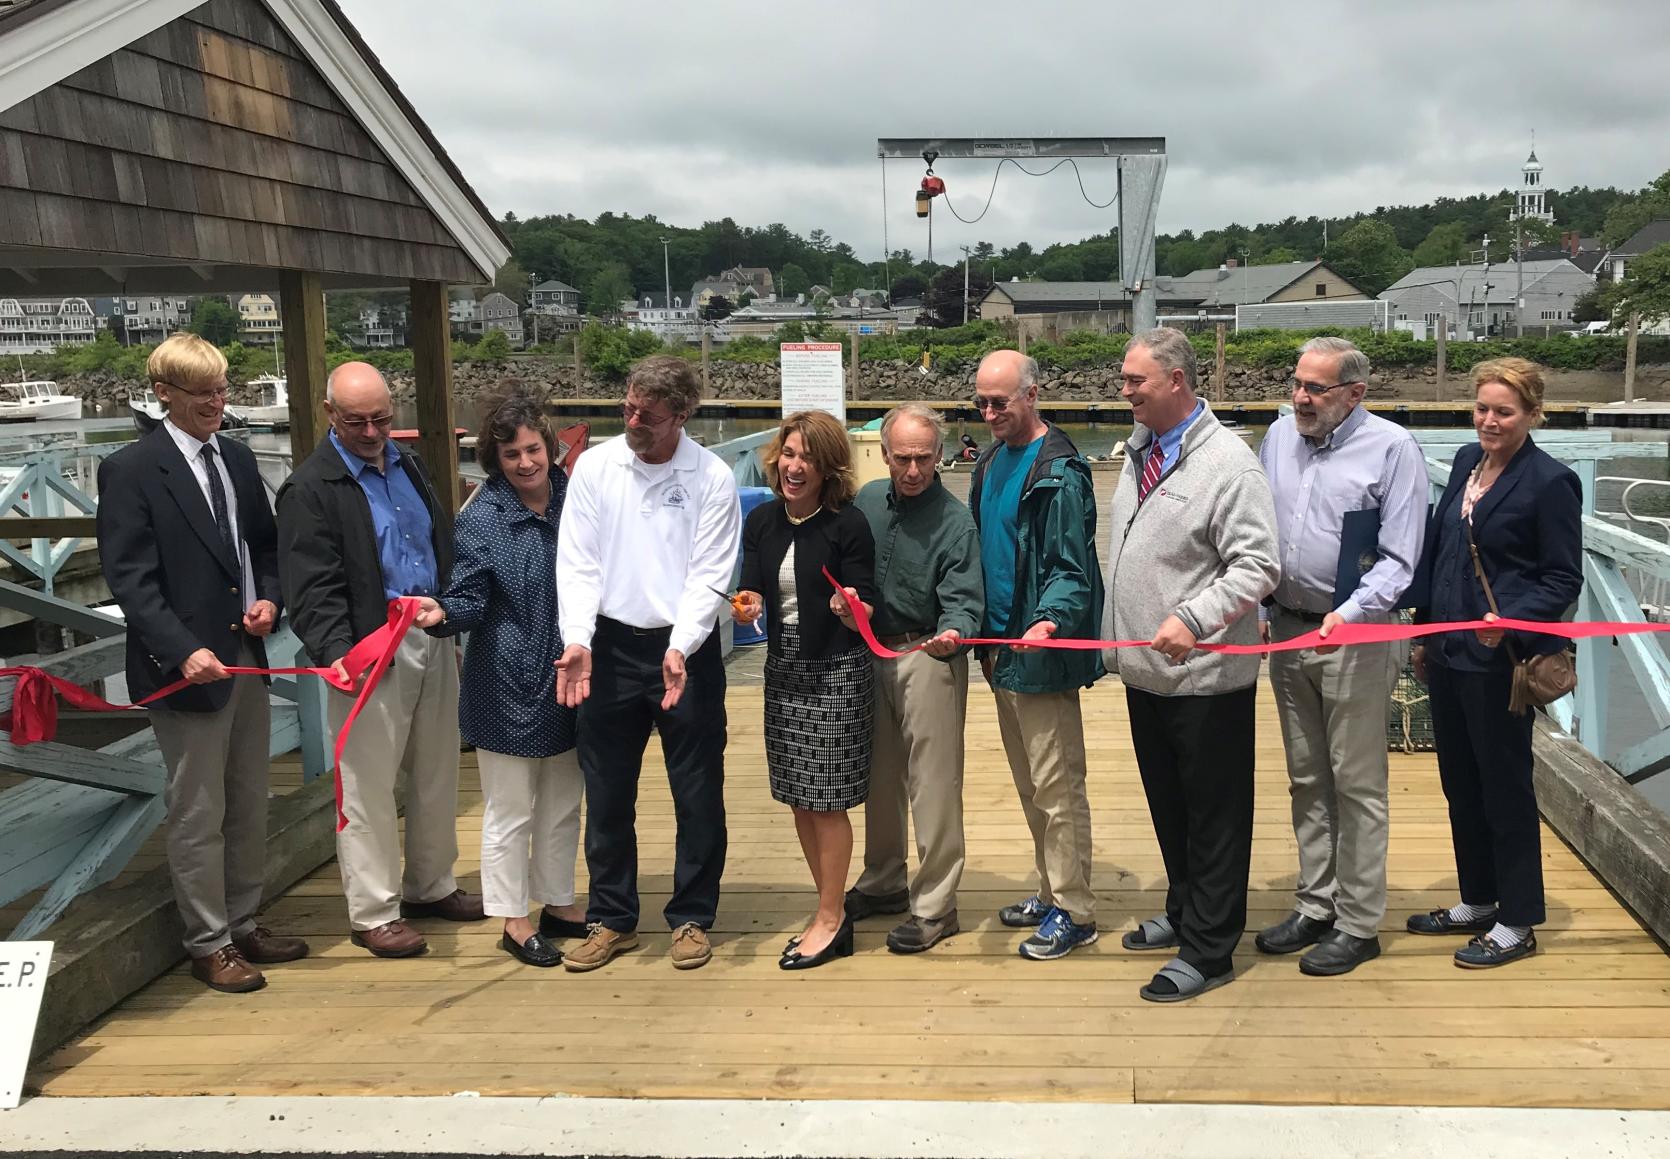 Lt. Governor Karyn Polito joined Manchester-by-the-Sea Town Administrator Greg Federspiel, Harbormaster Bion Pike, and other local leaders to celebrate the re-opening of Morss Pier.